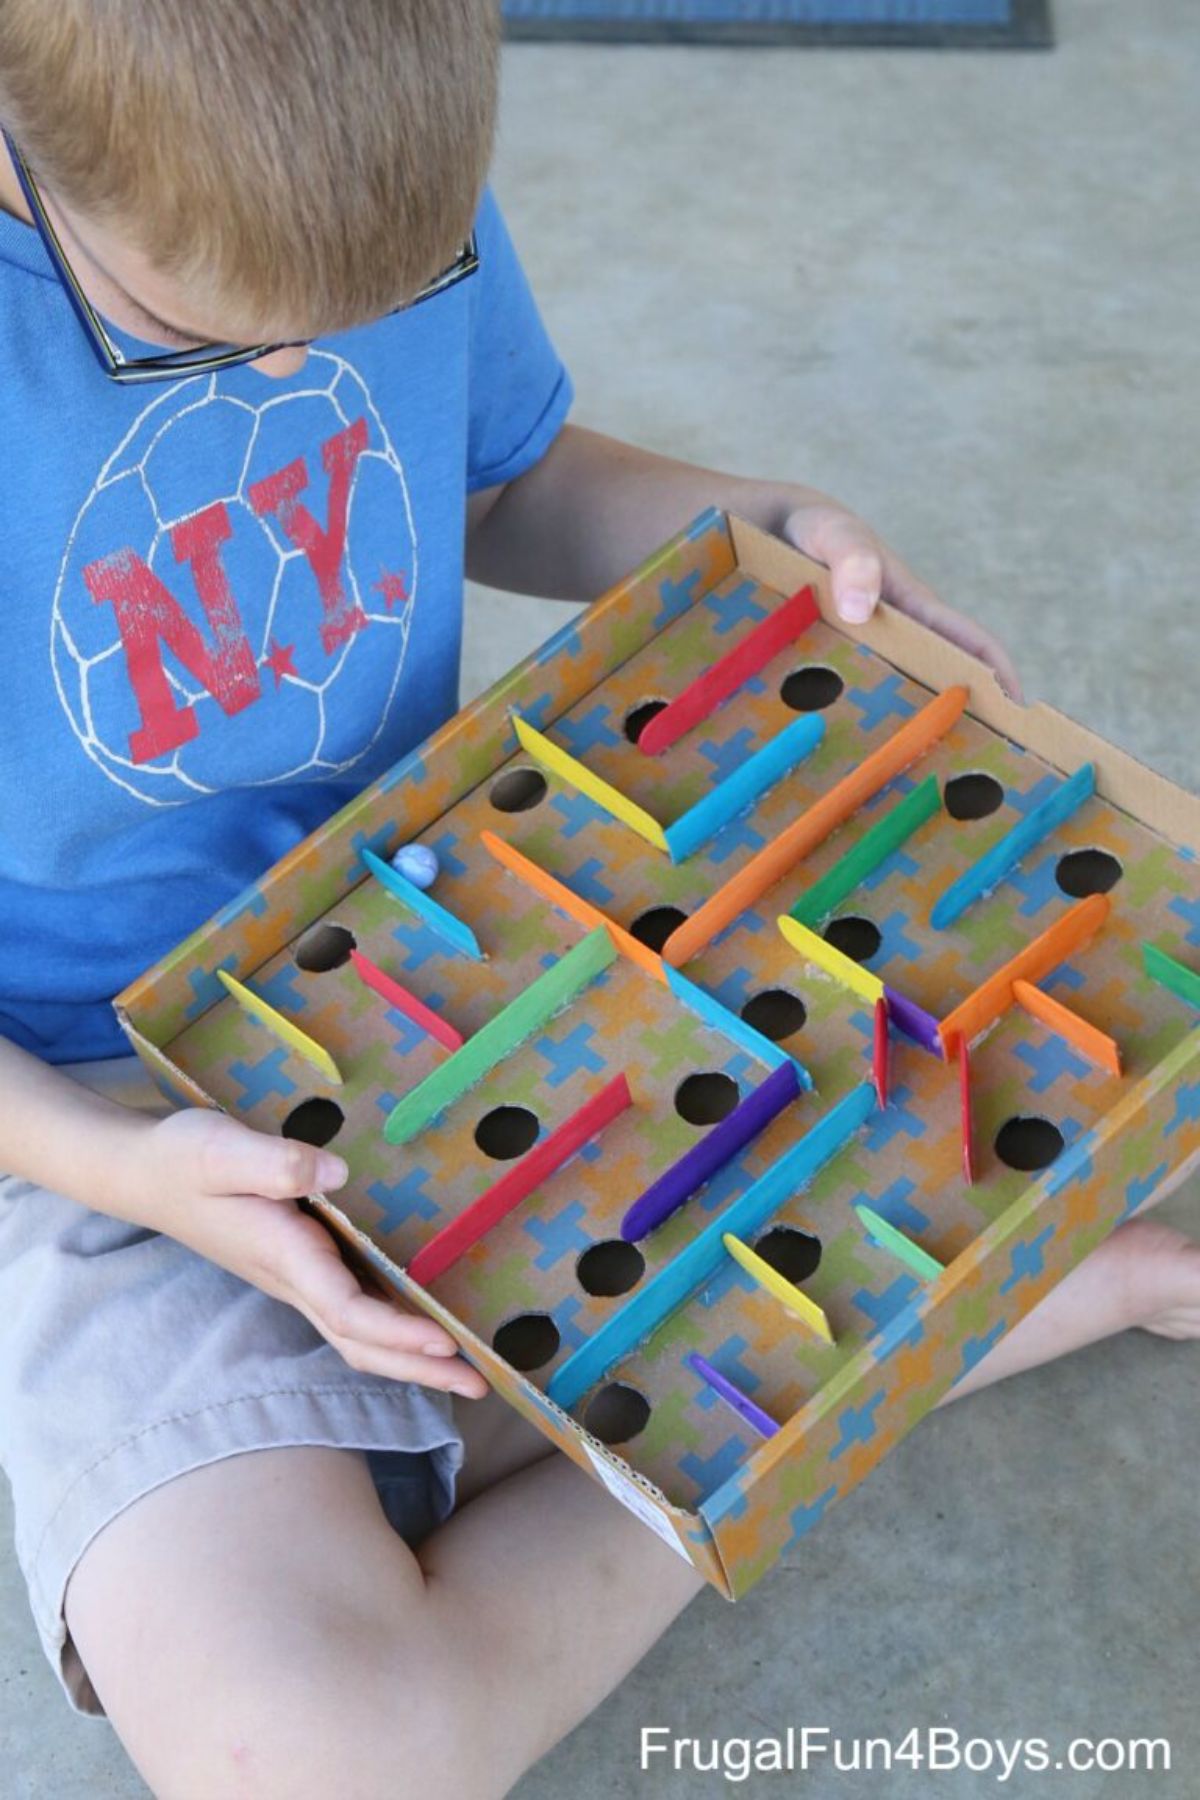 a boy wearing glasses, shorts and a t-shirt holds a cardboard maze, guiding a marble around the walls